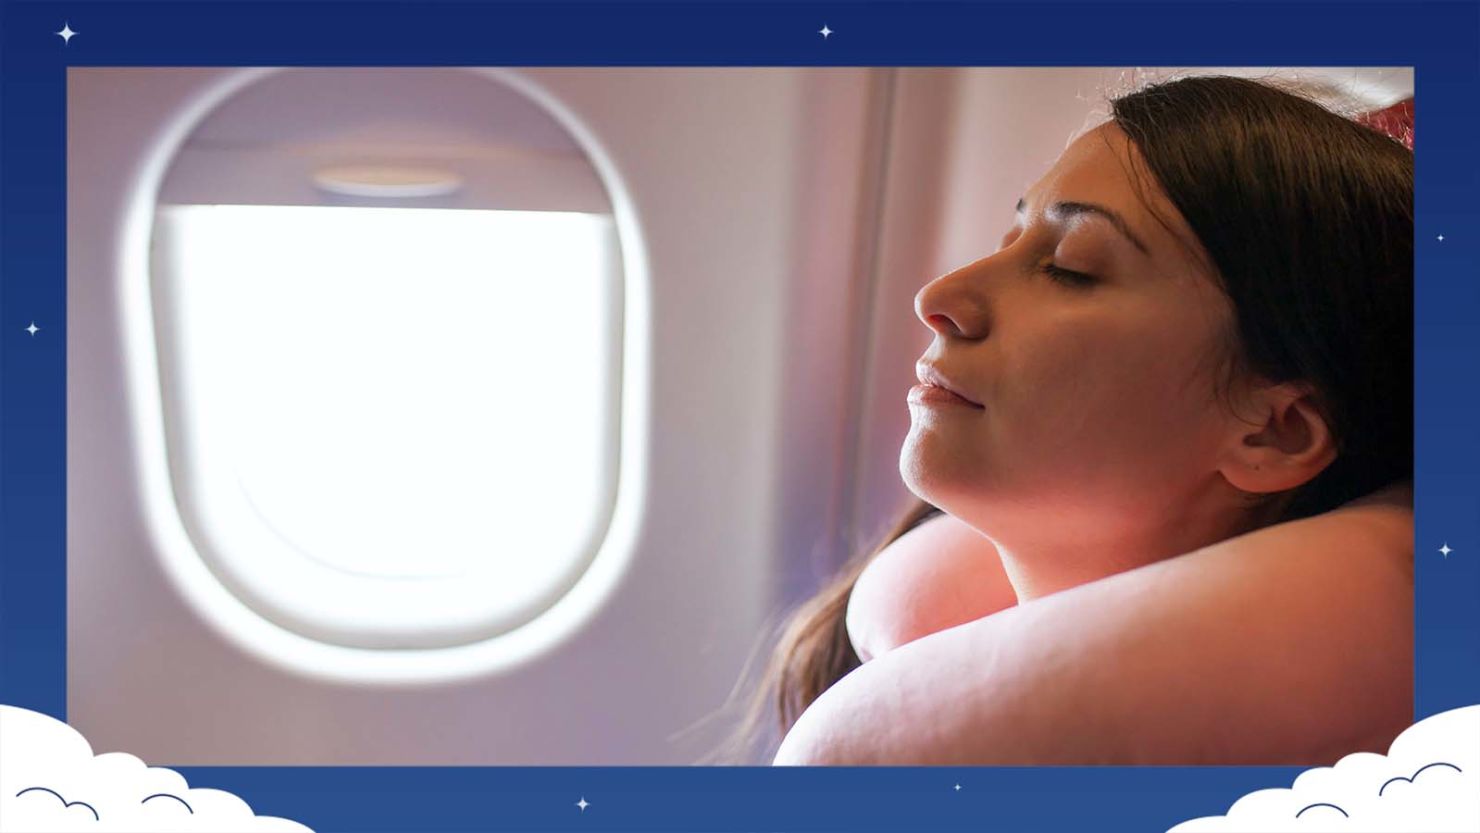 9 Quick Back Pain Tips for Airplane Rides